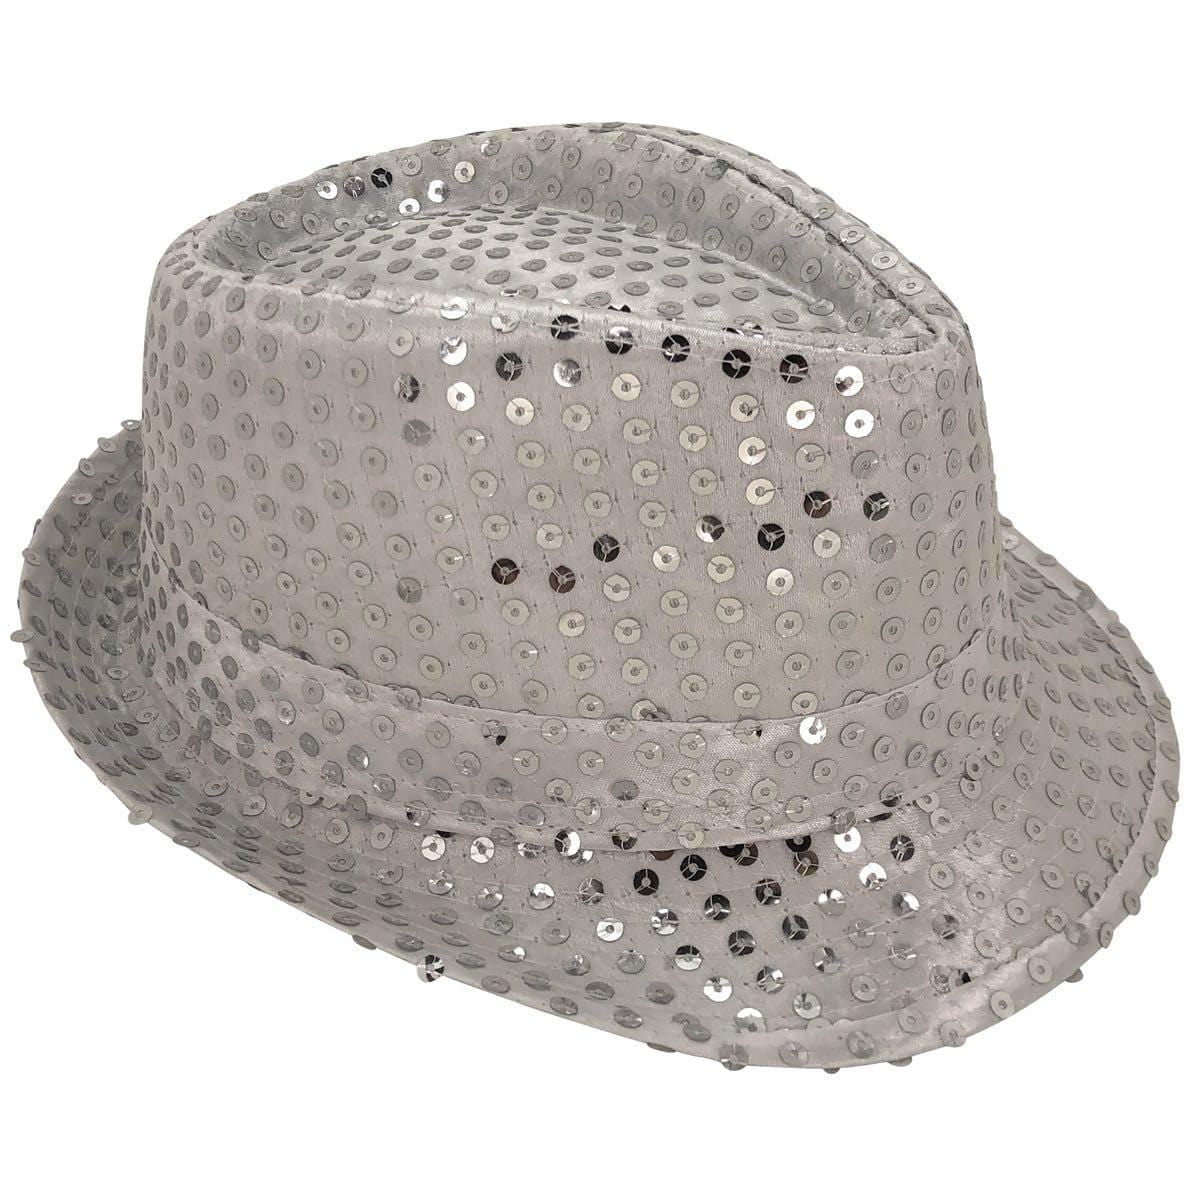 Buy Costume Accessories Silver sequin fedora hat for kids sold at Party Expert